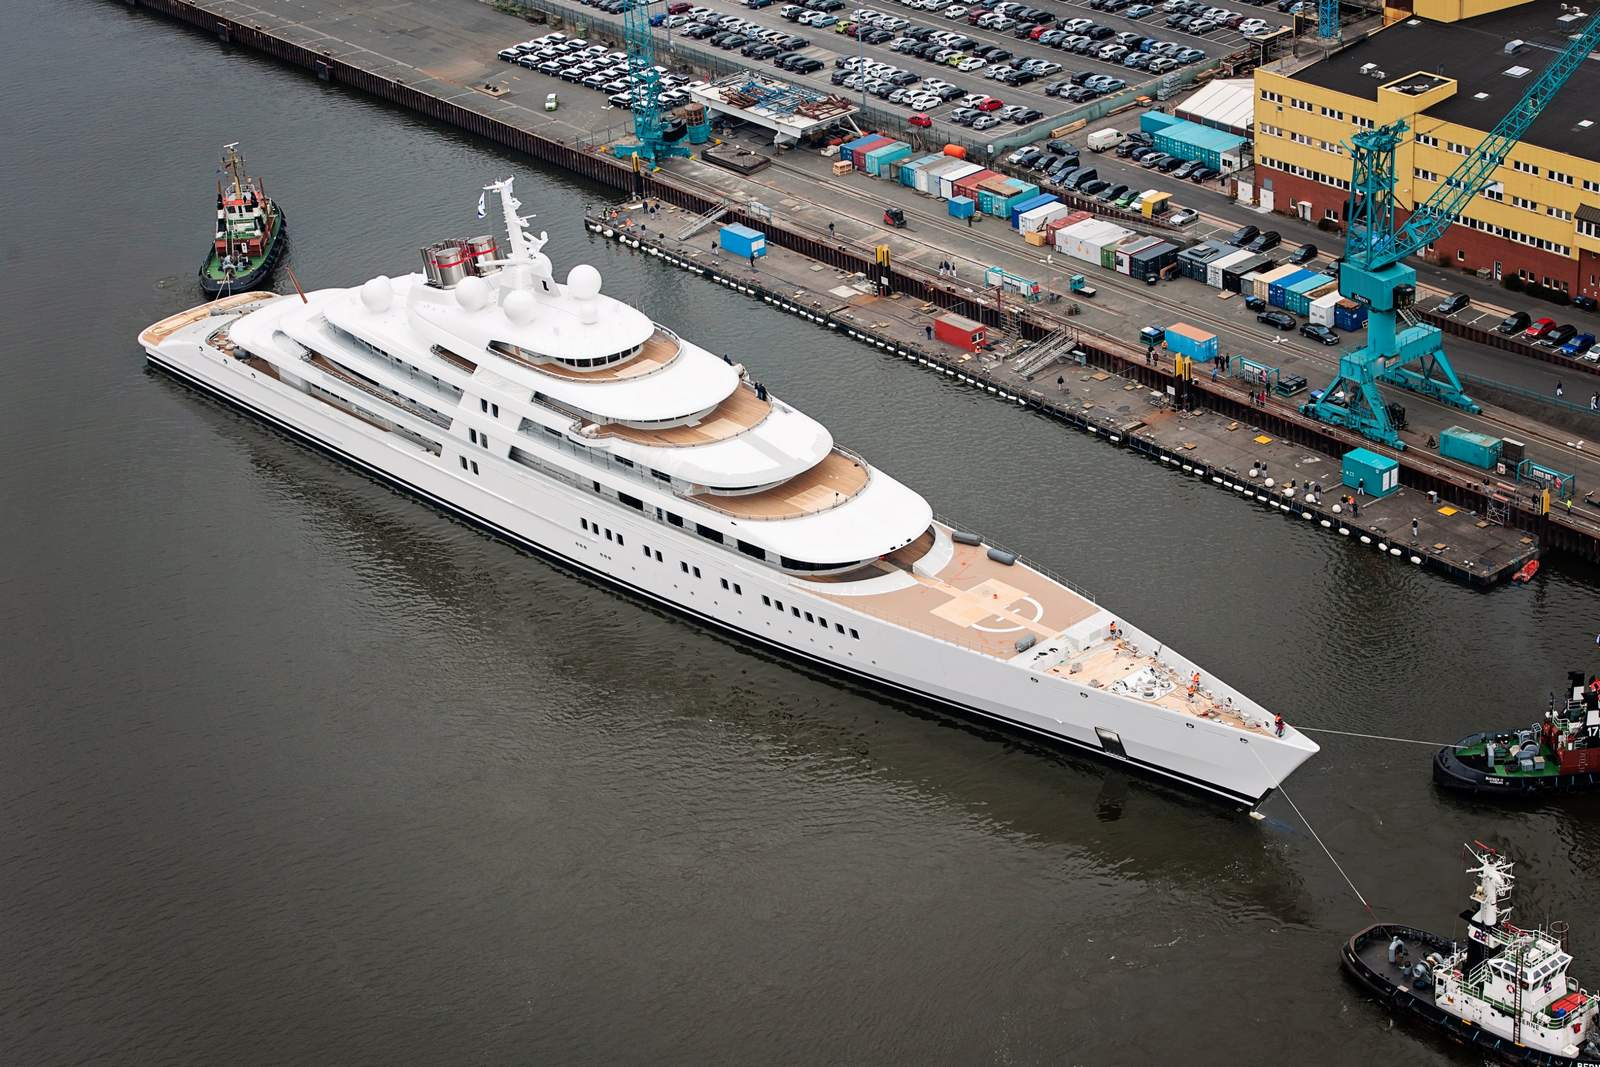 who owns the largest yacht in the world